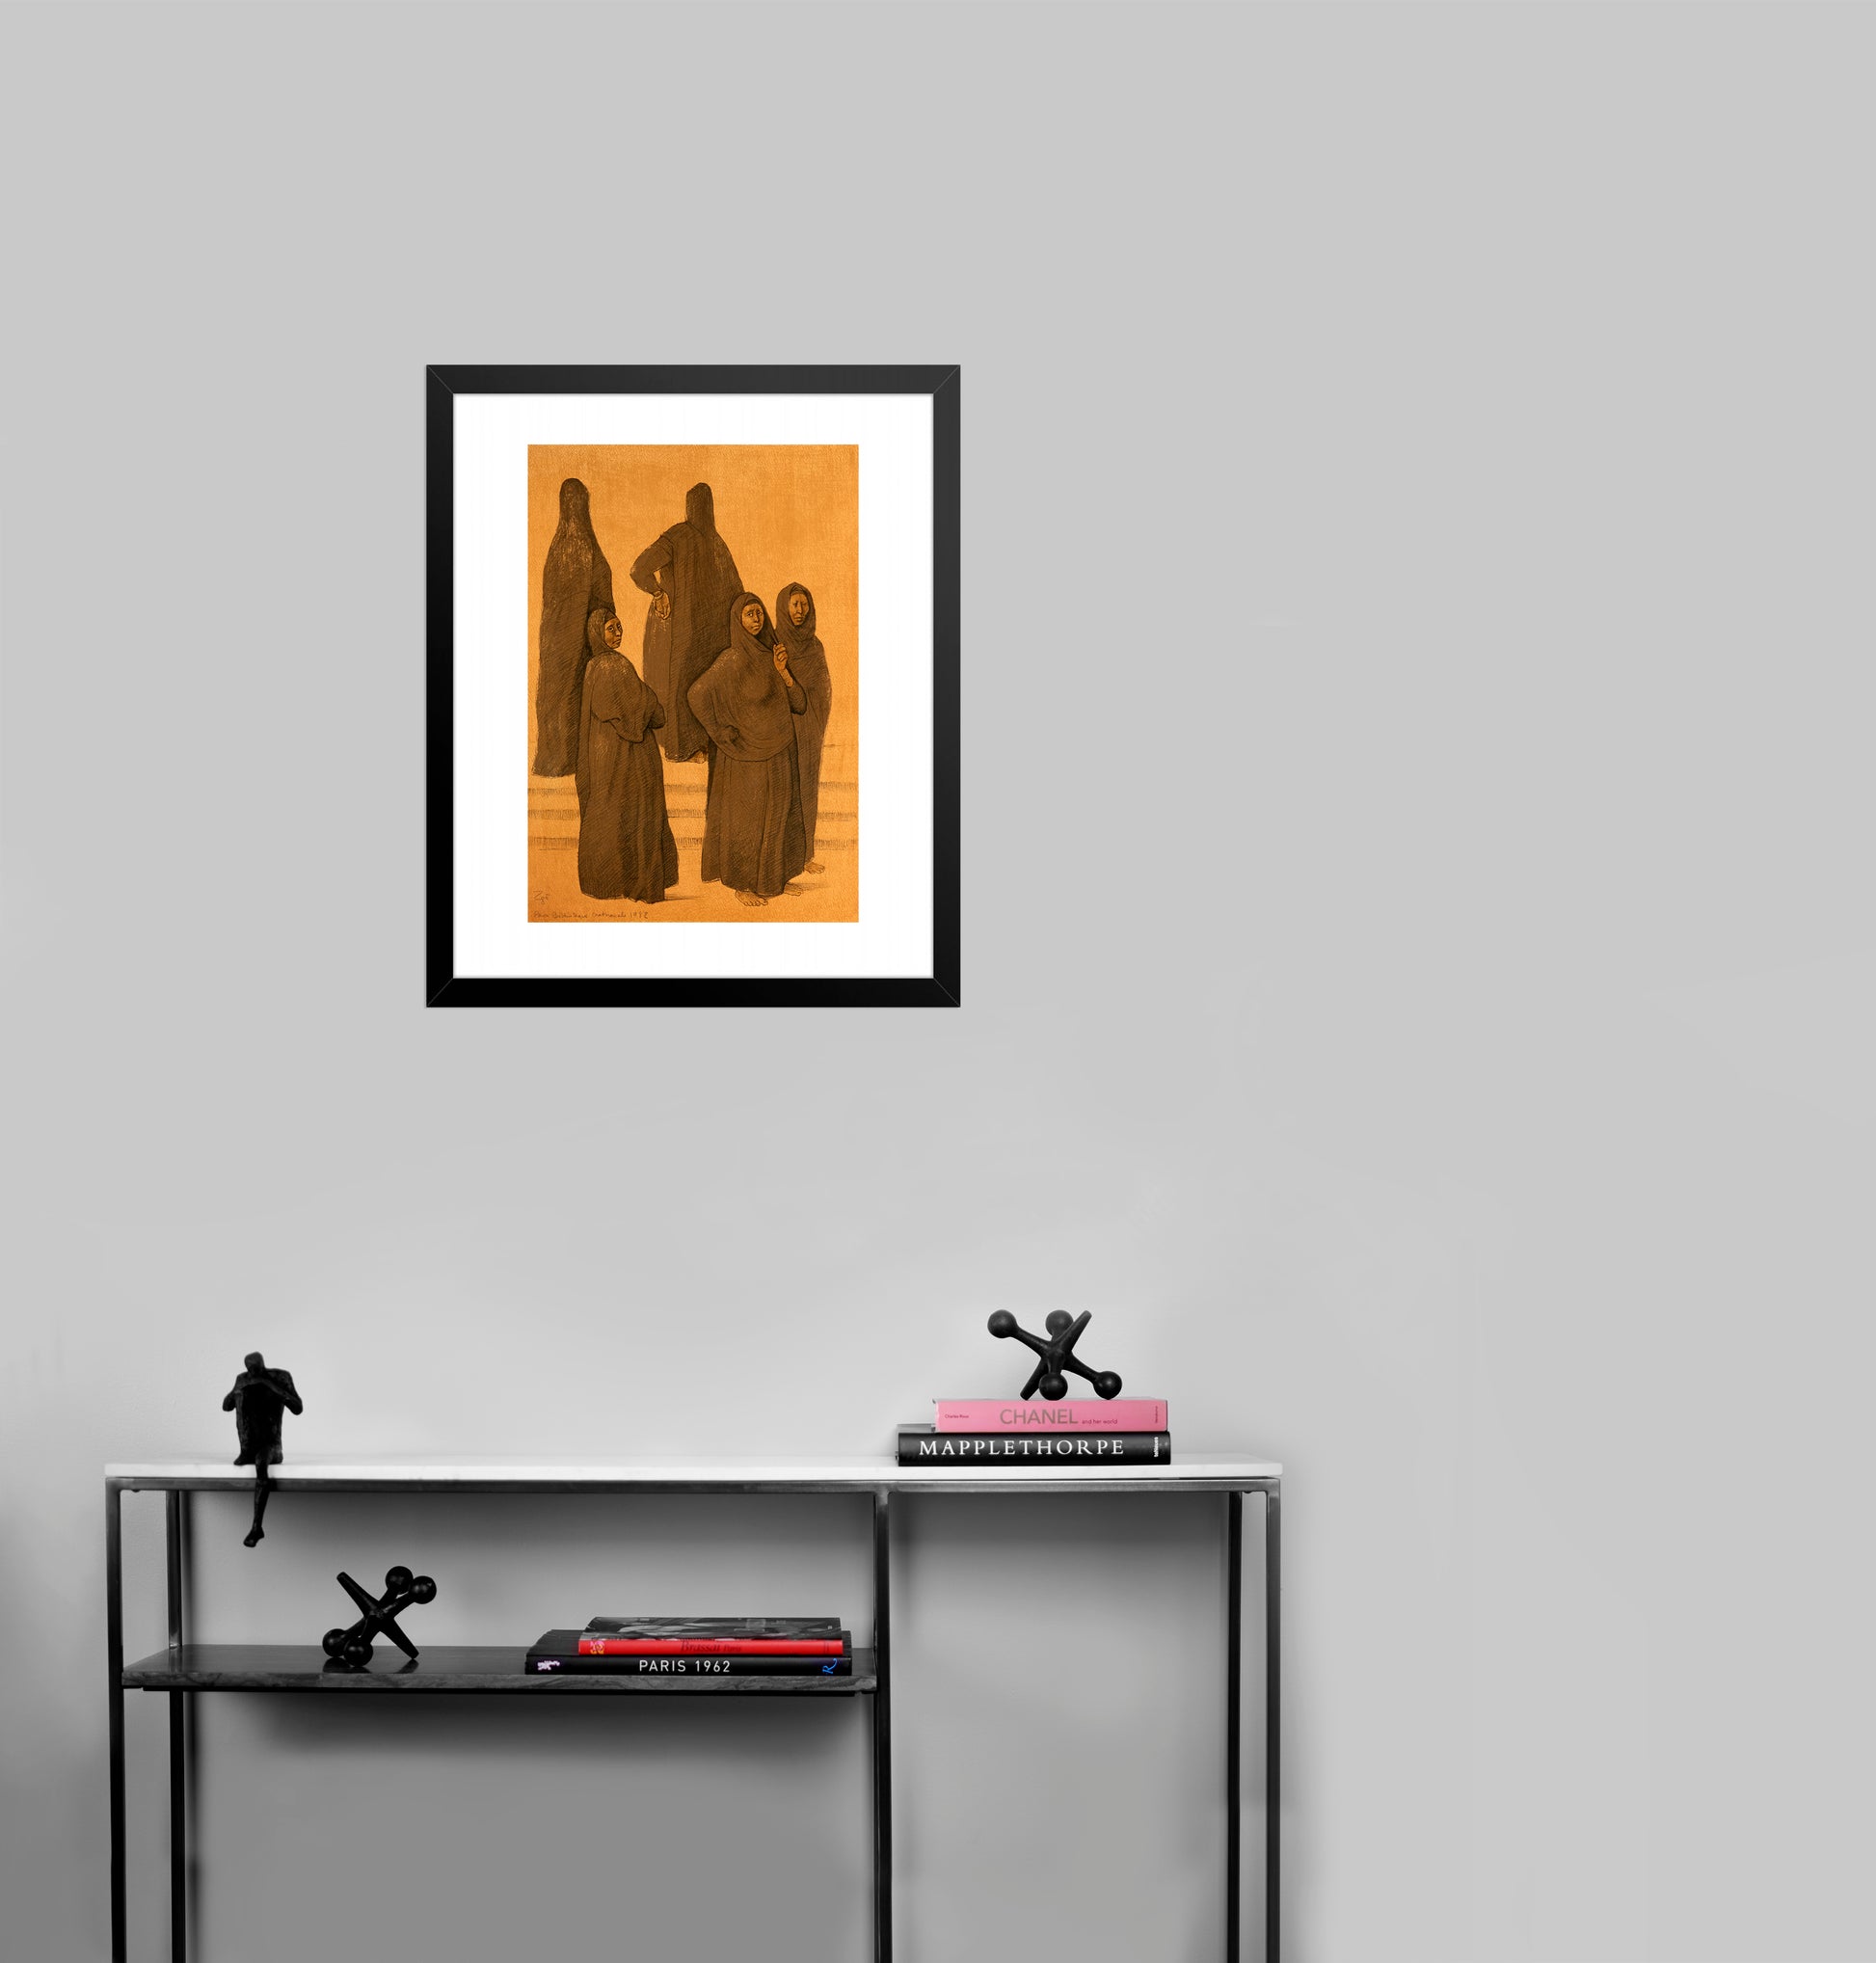 Impressions of Egypt Suite, Plate 1 by Francisco Zuniga - Mourlot Editions - Fine_Art - Poster - Lithograph - Wall Art - Vintage - Prints - Original